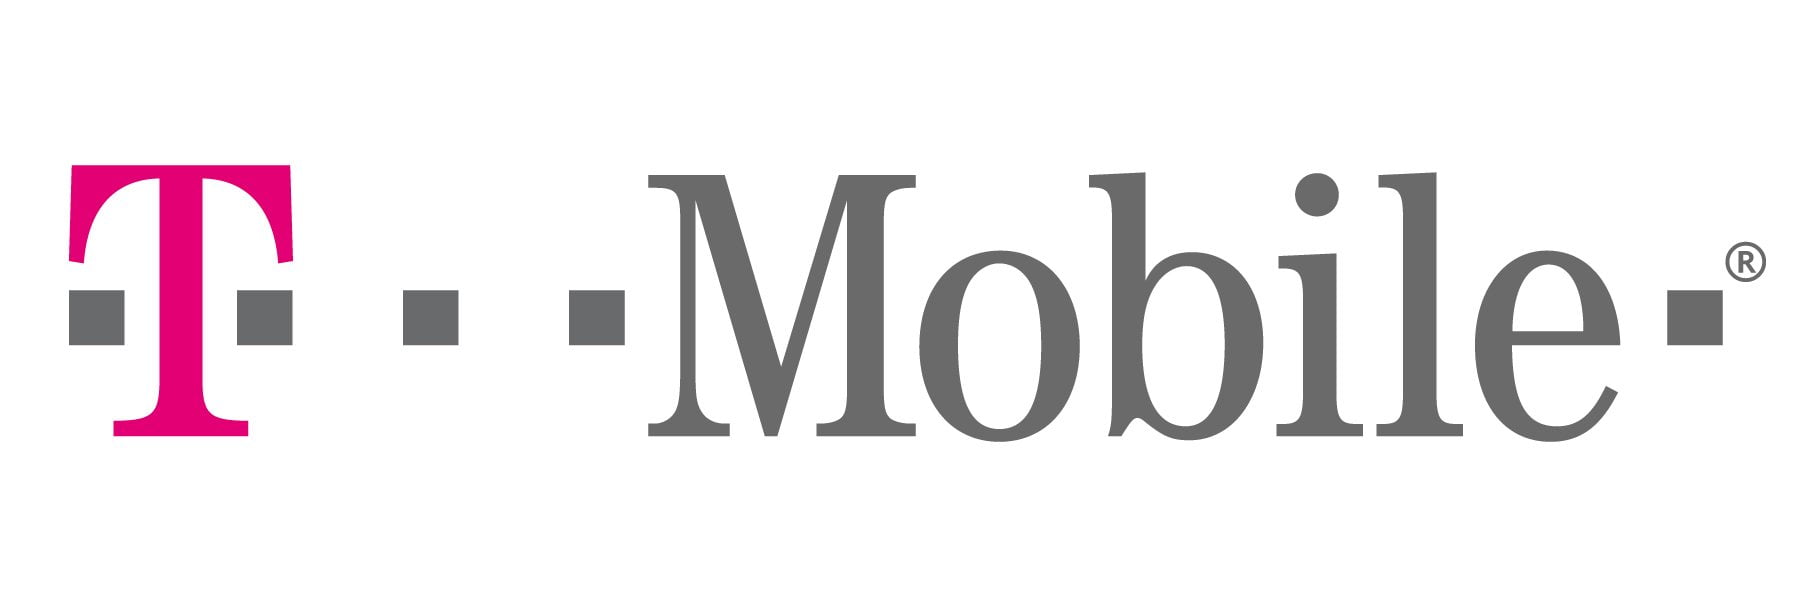 Find the best T-Mobile Cell Phone Plans on Gadget Review.